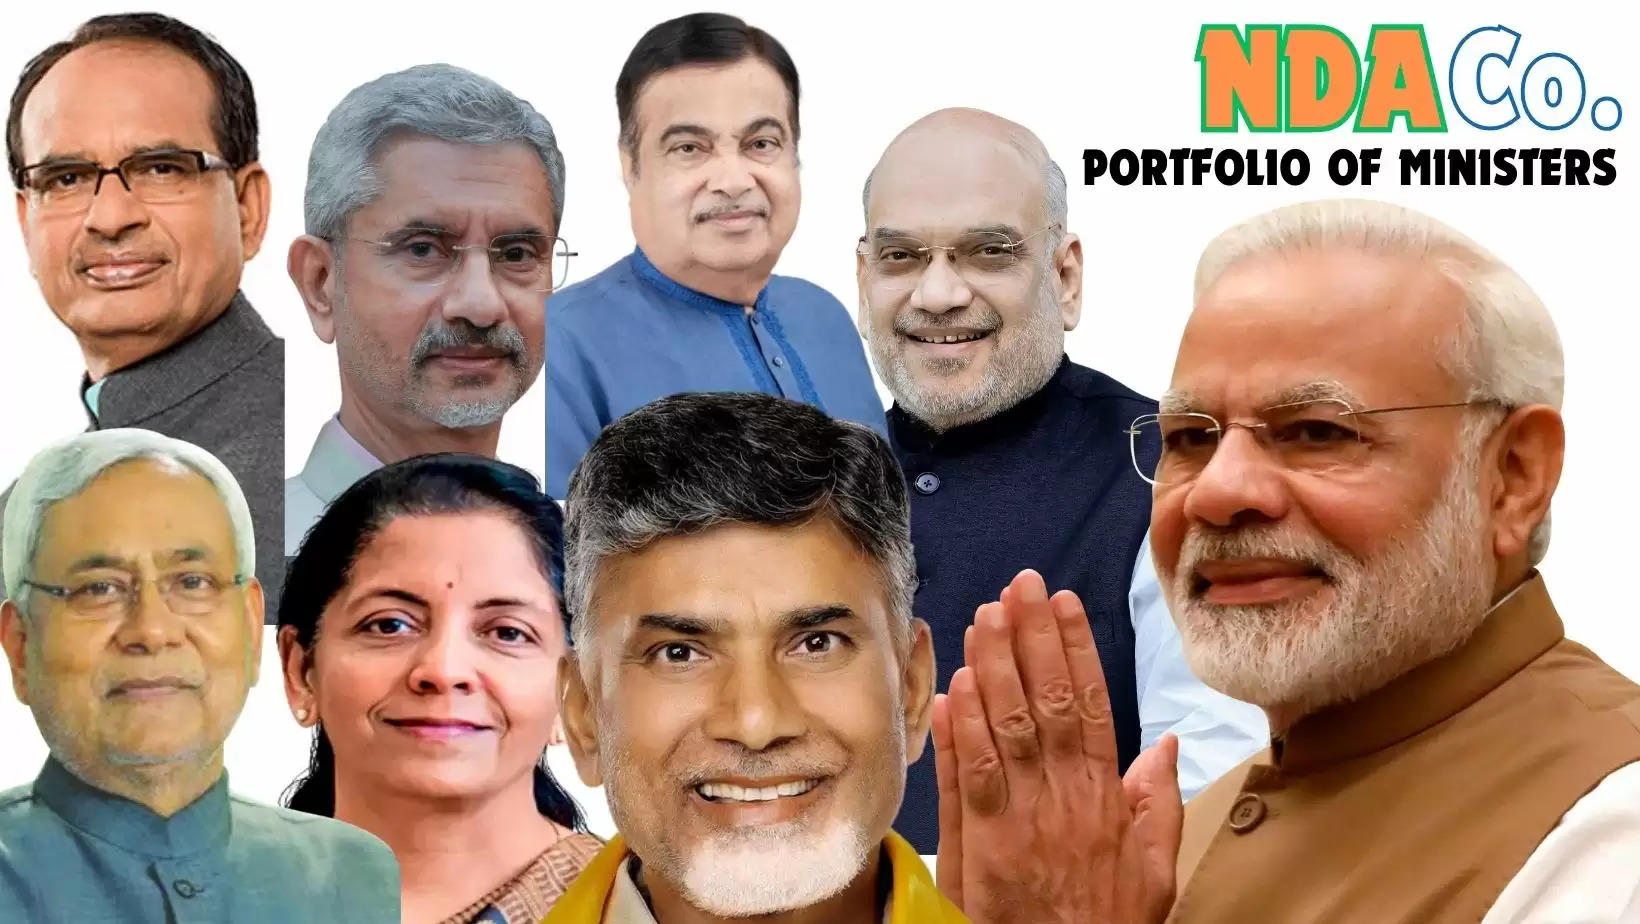 NDA Government Narendra Modi Portfolio of Ministers Announced Who is Who in the Cabinet of Ministers